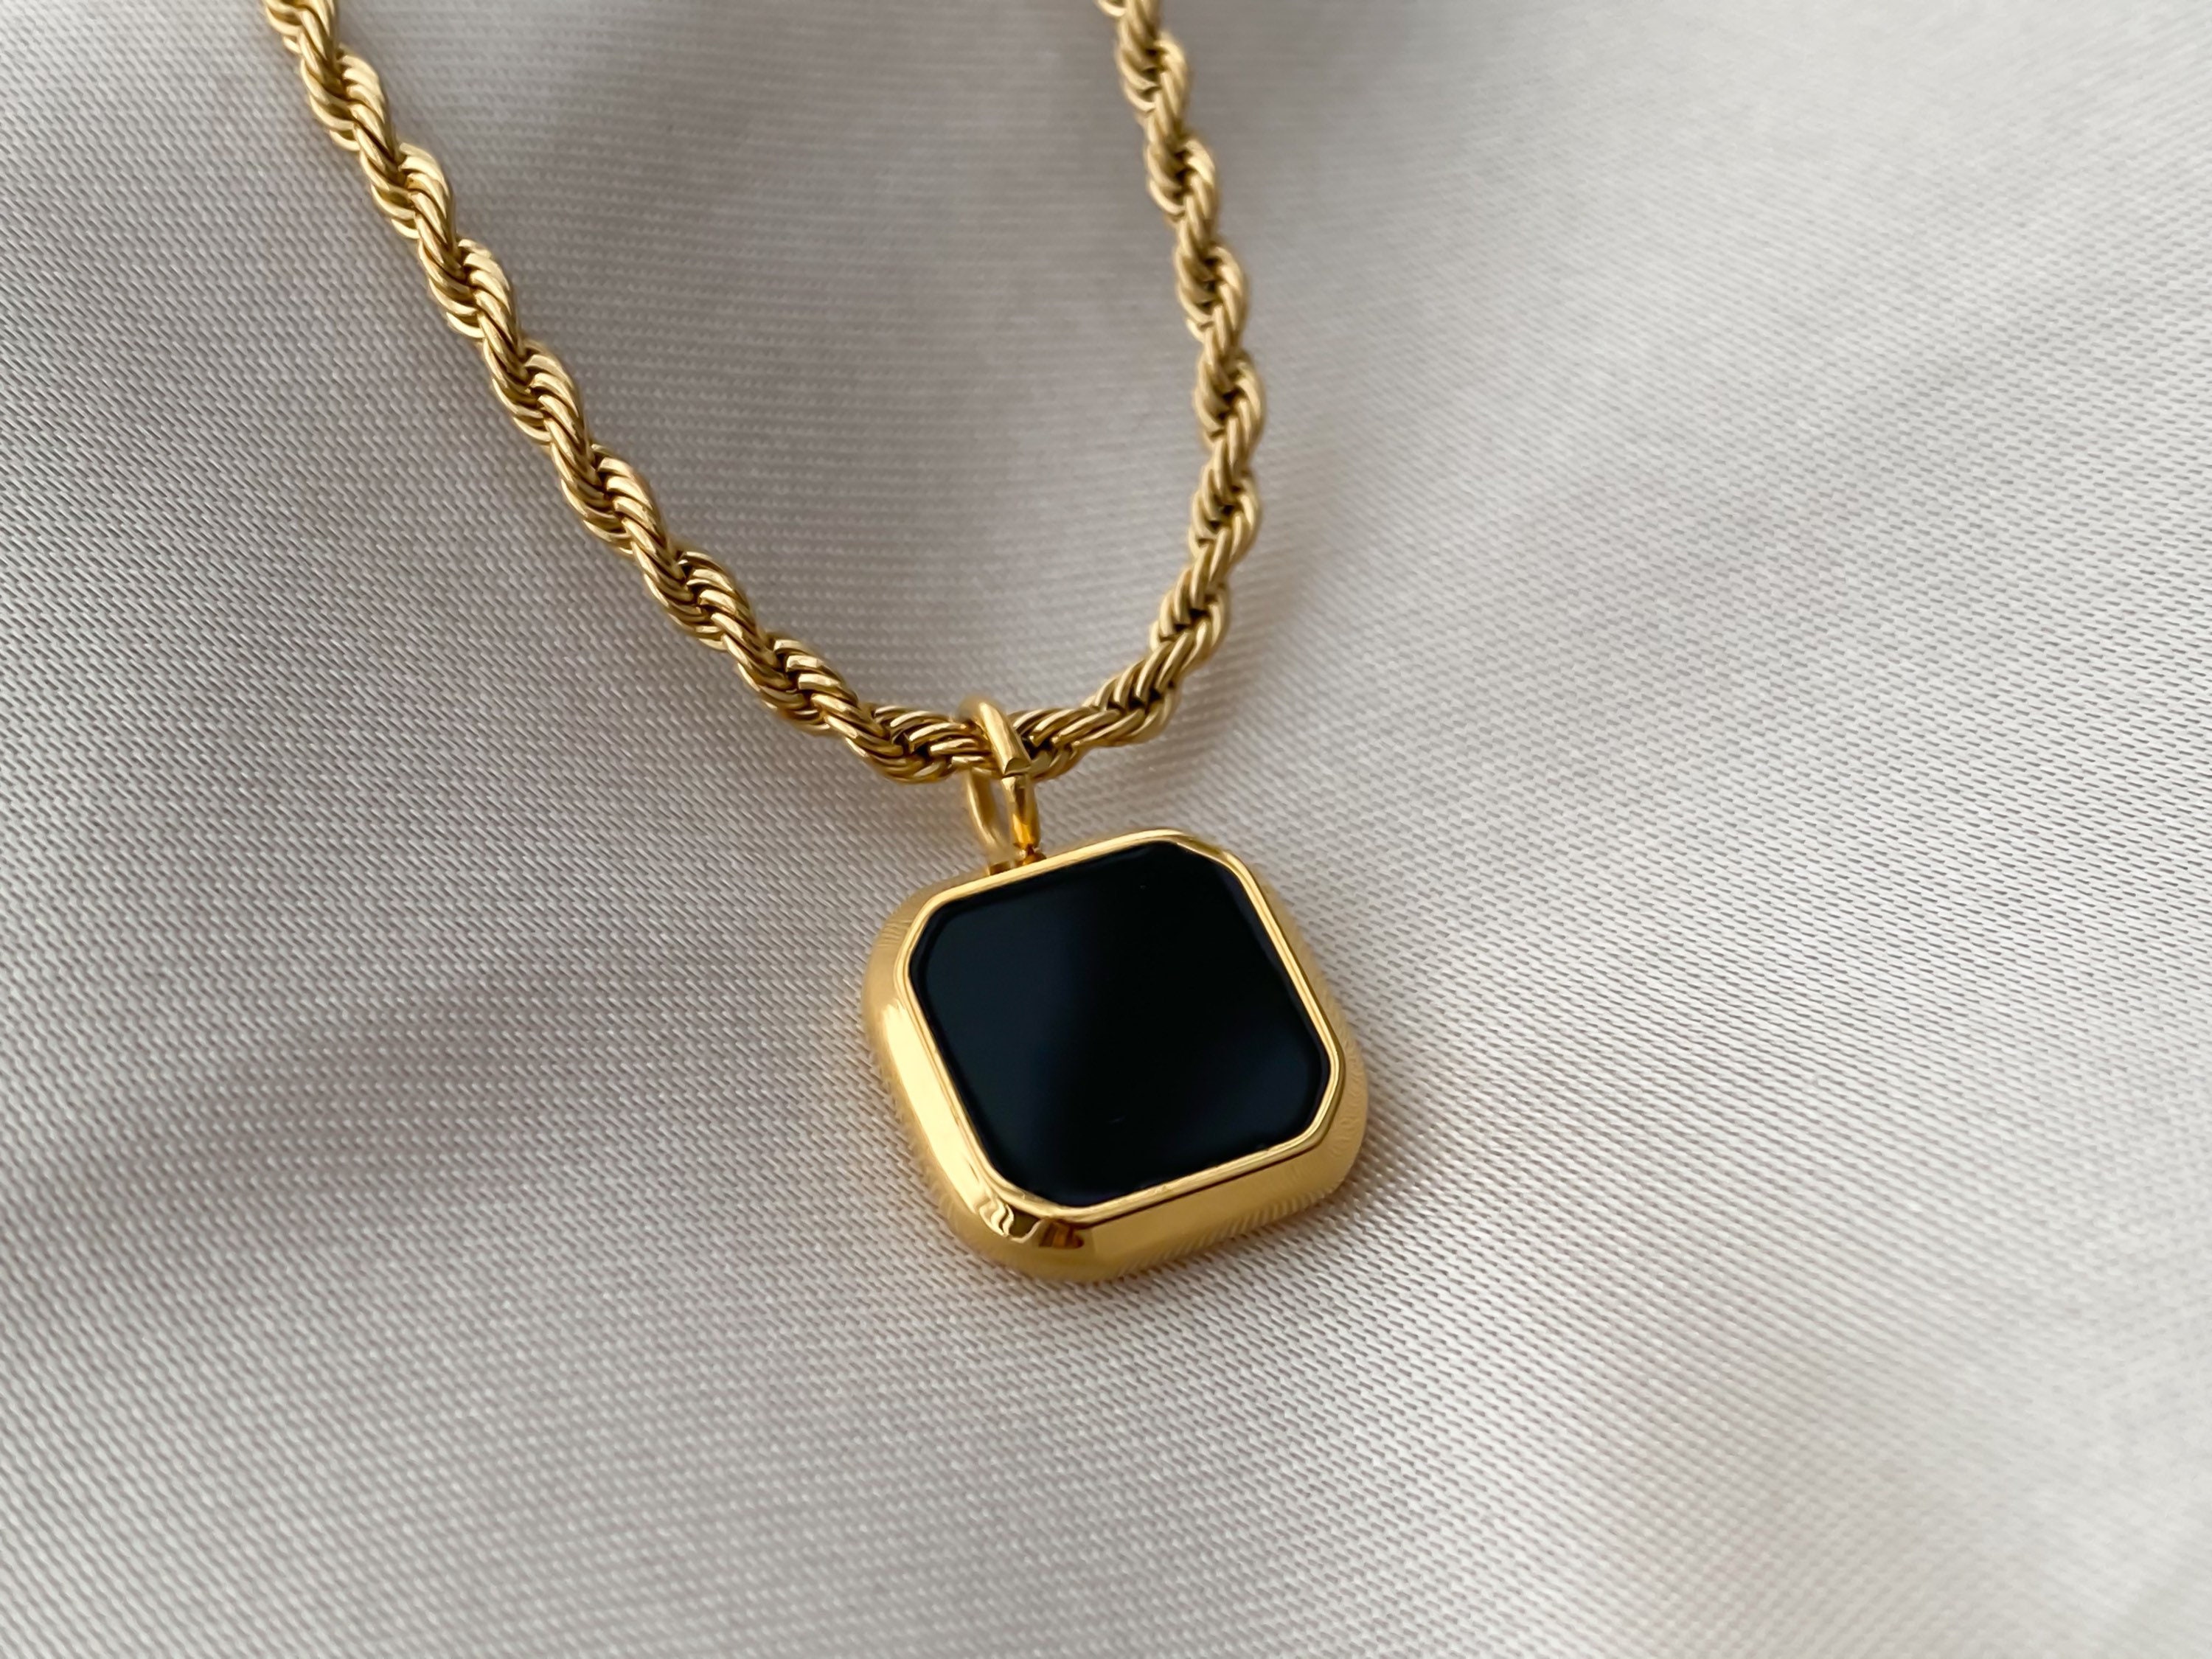 Black Onyx Pendant On A Rope Chain. Gold Plated Stainless Steel Necklace Black Pendant